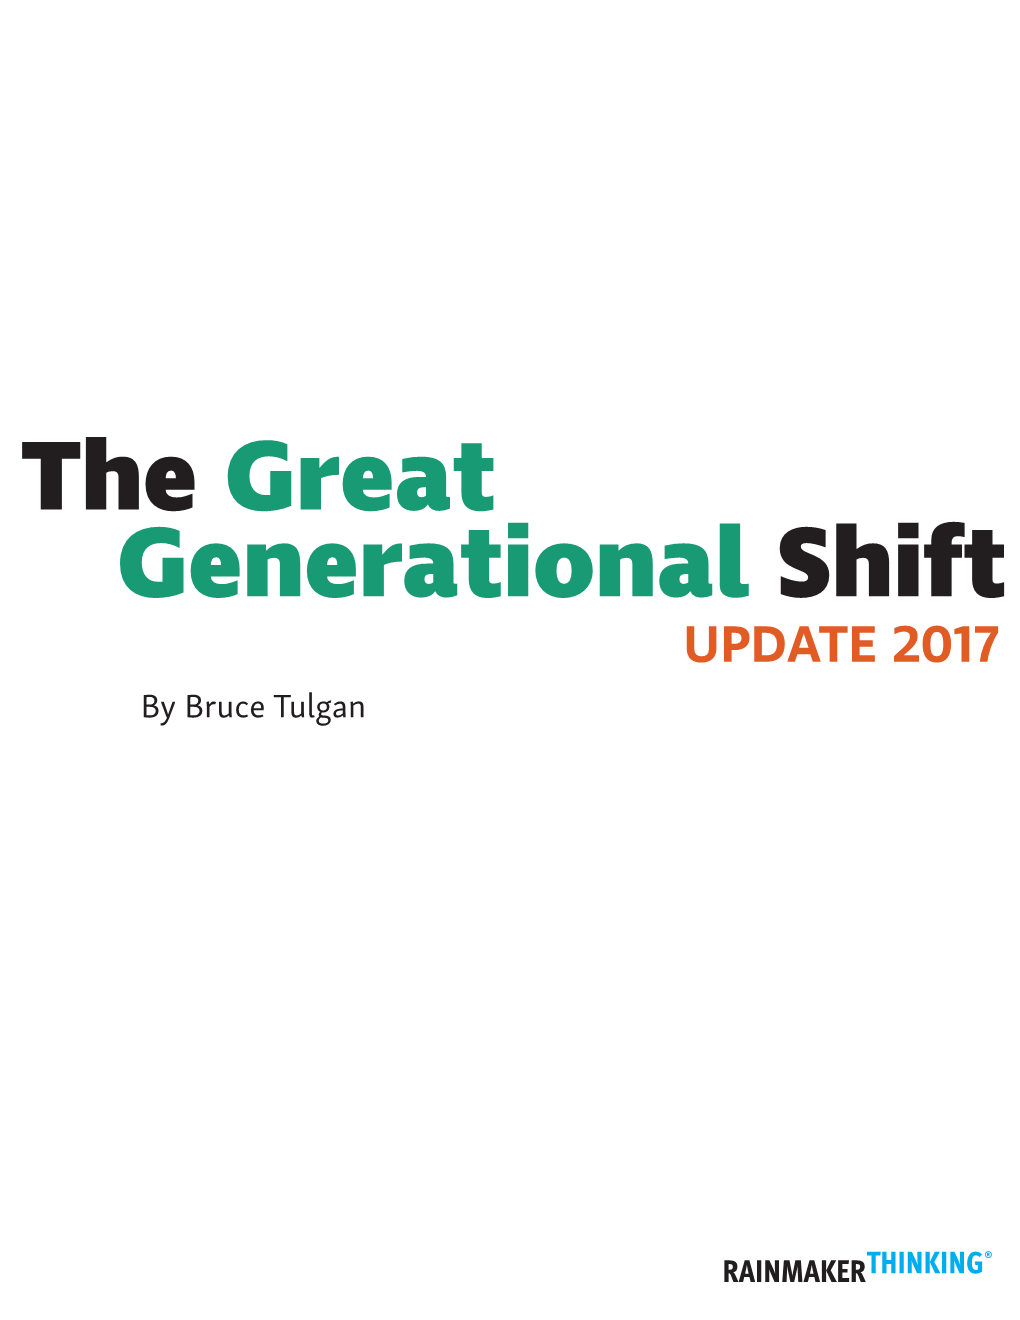 The Great Generational Shift UPDATE 2017 by Bruce Tulgan by Bruce Tulgan